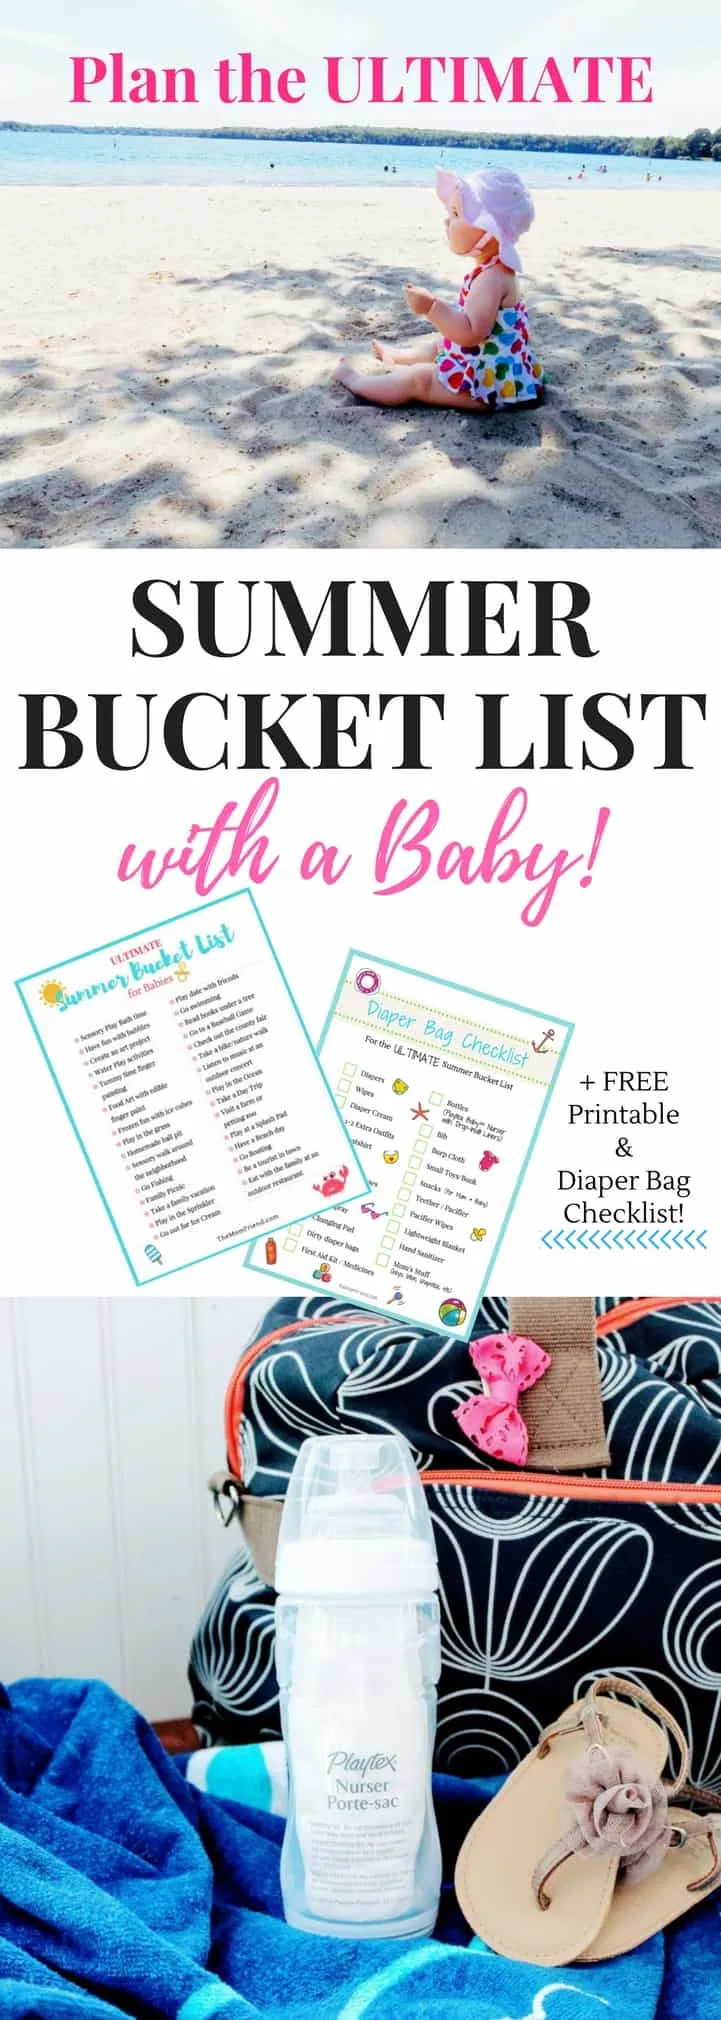 Pinnable image of Ultimate Summer Bucket List for Your Baby.